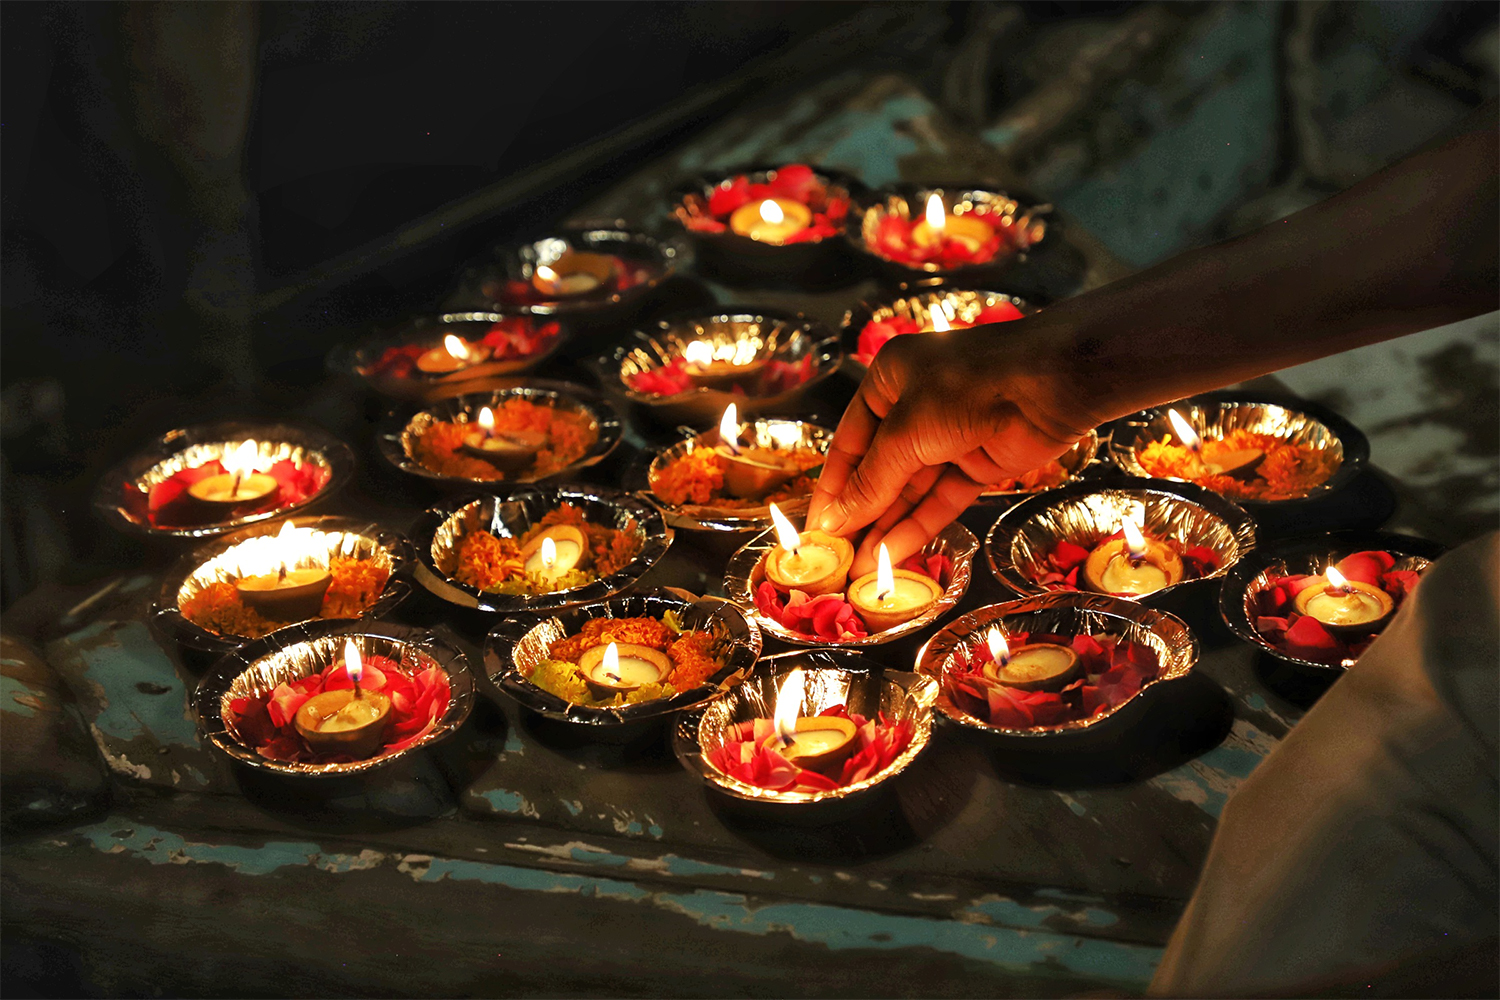 A hand reaches down to grab a bowl holding a candle in Varanasi, India, at night